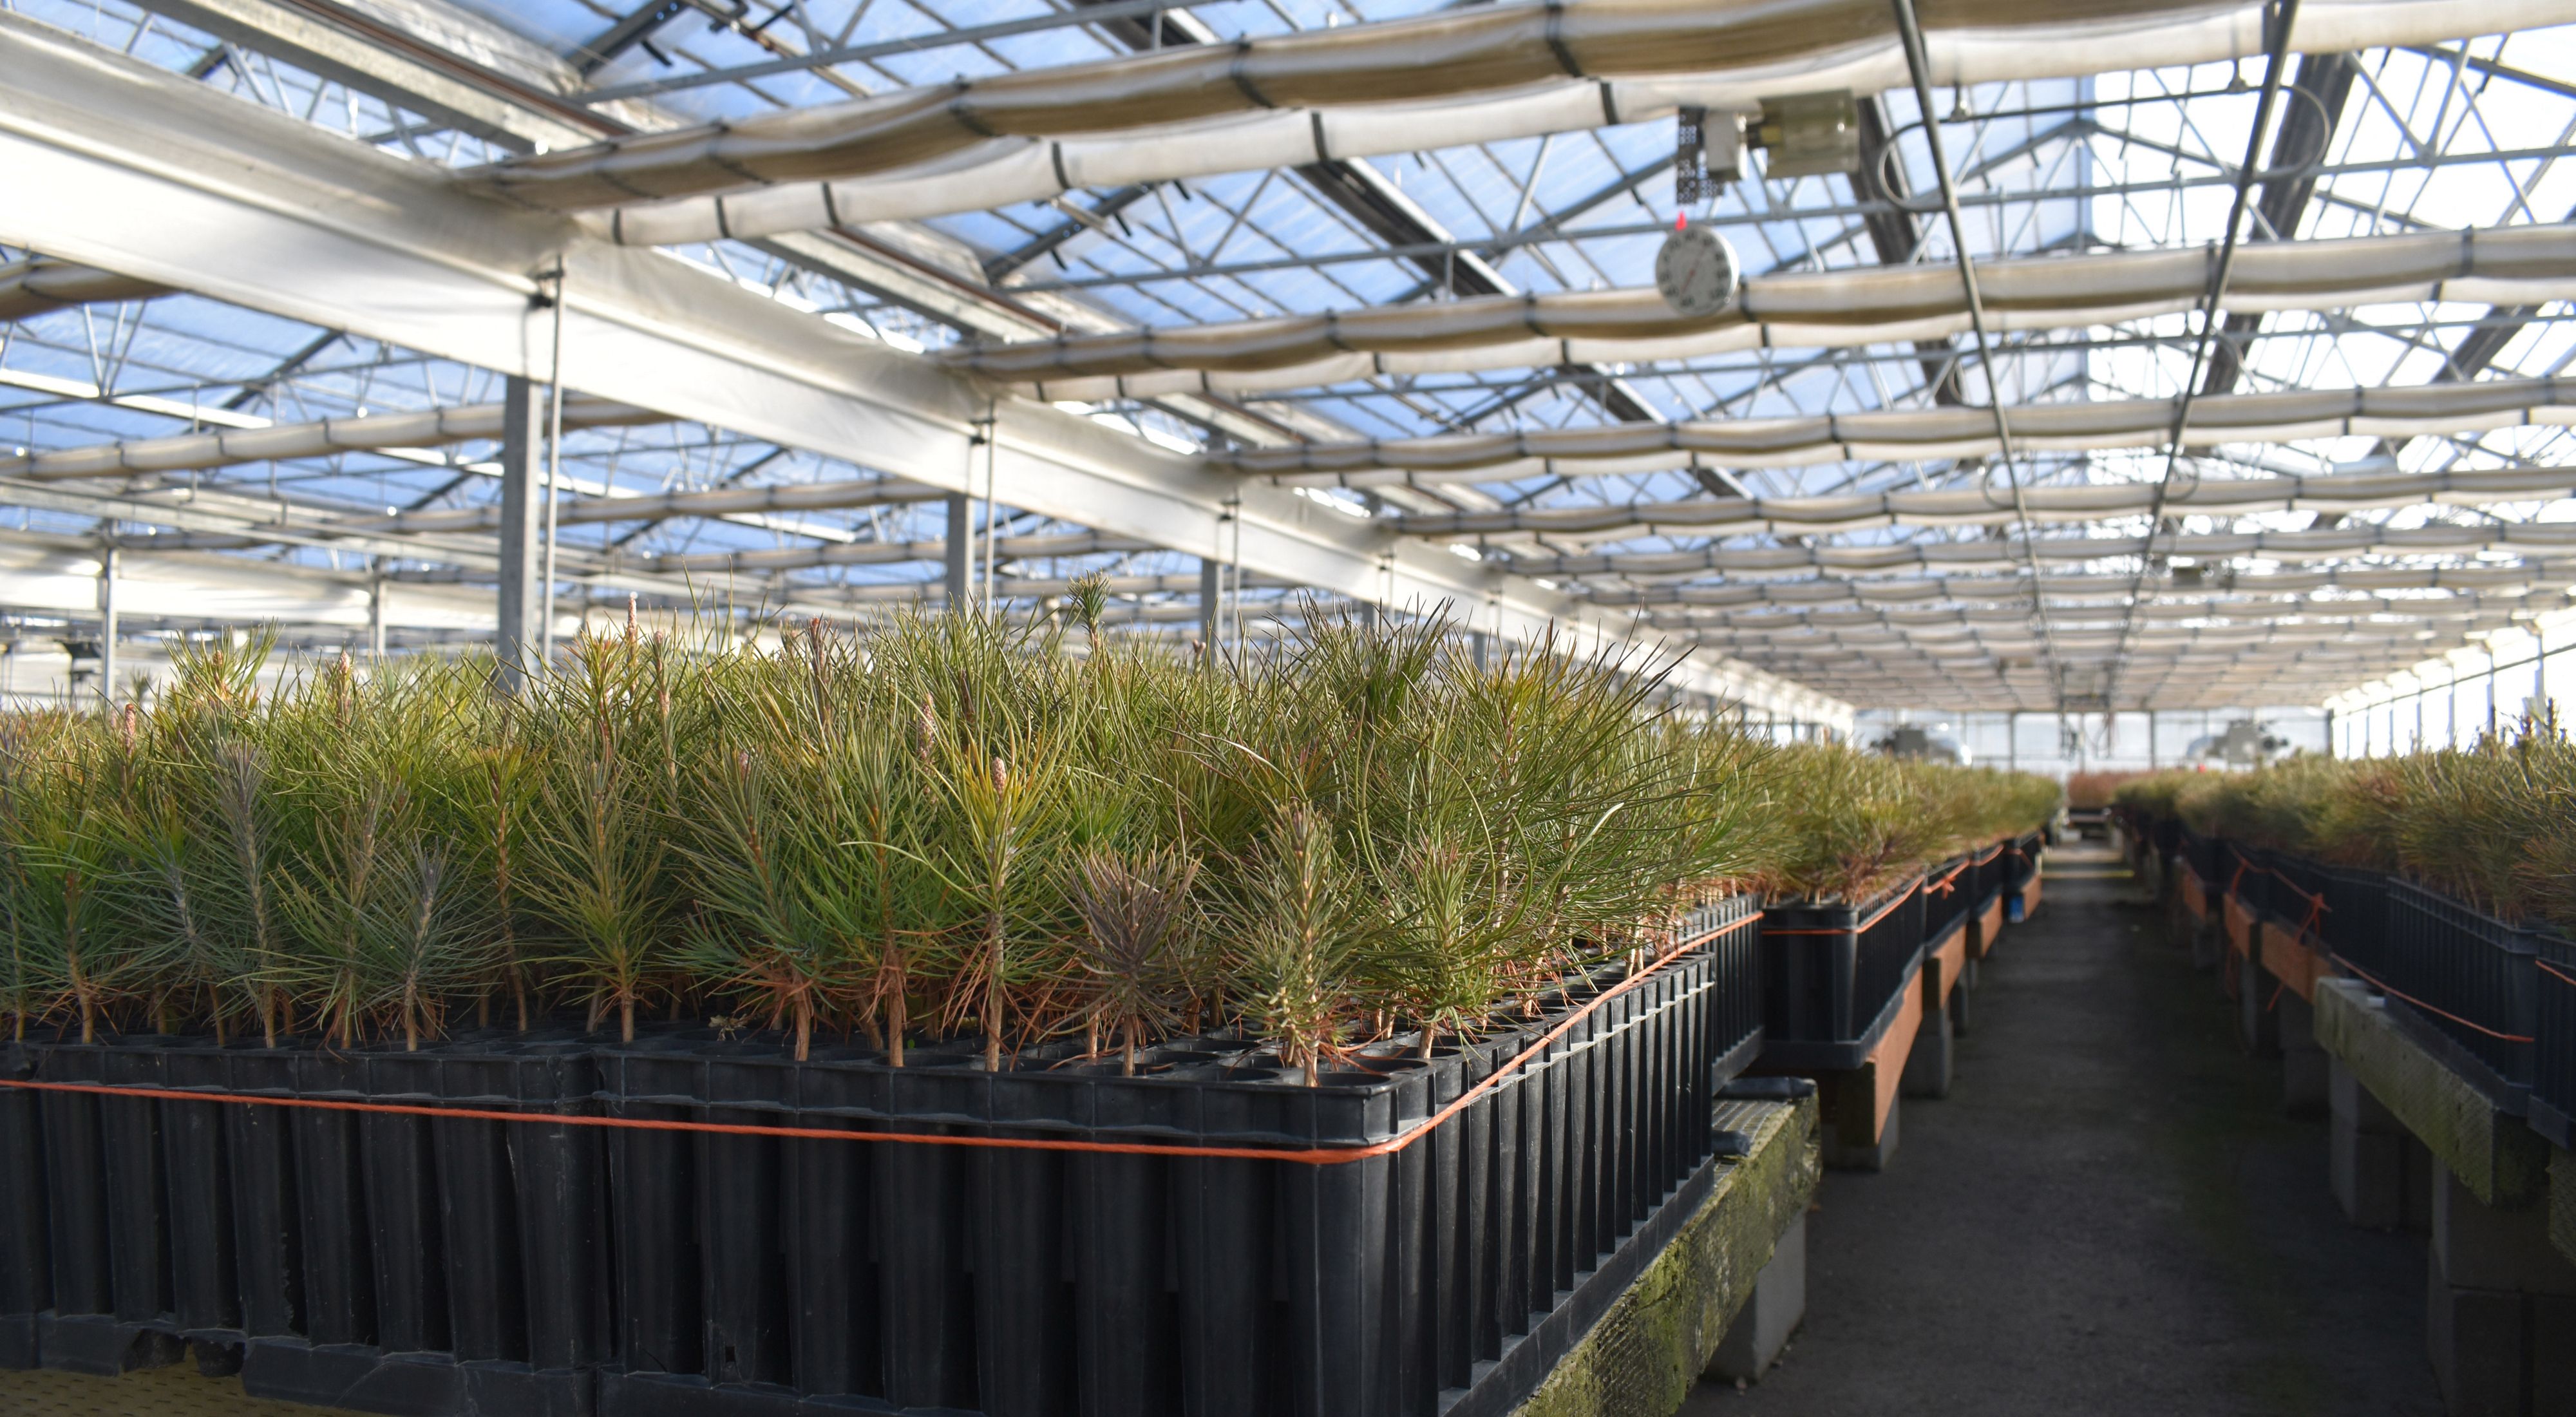  A greenhouse with long rows of evergreen tree seedlings arrayed on tables.